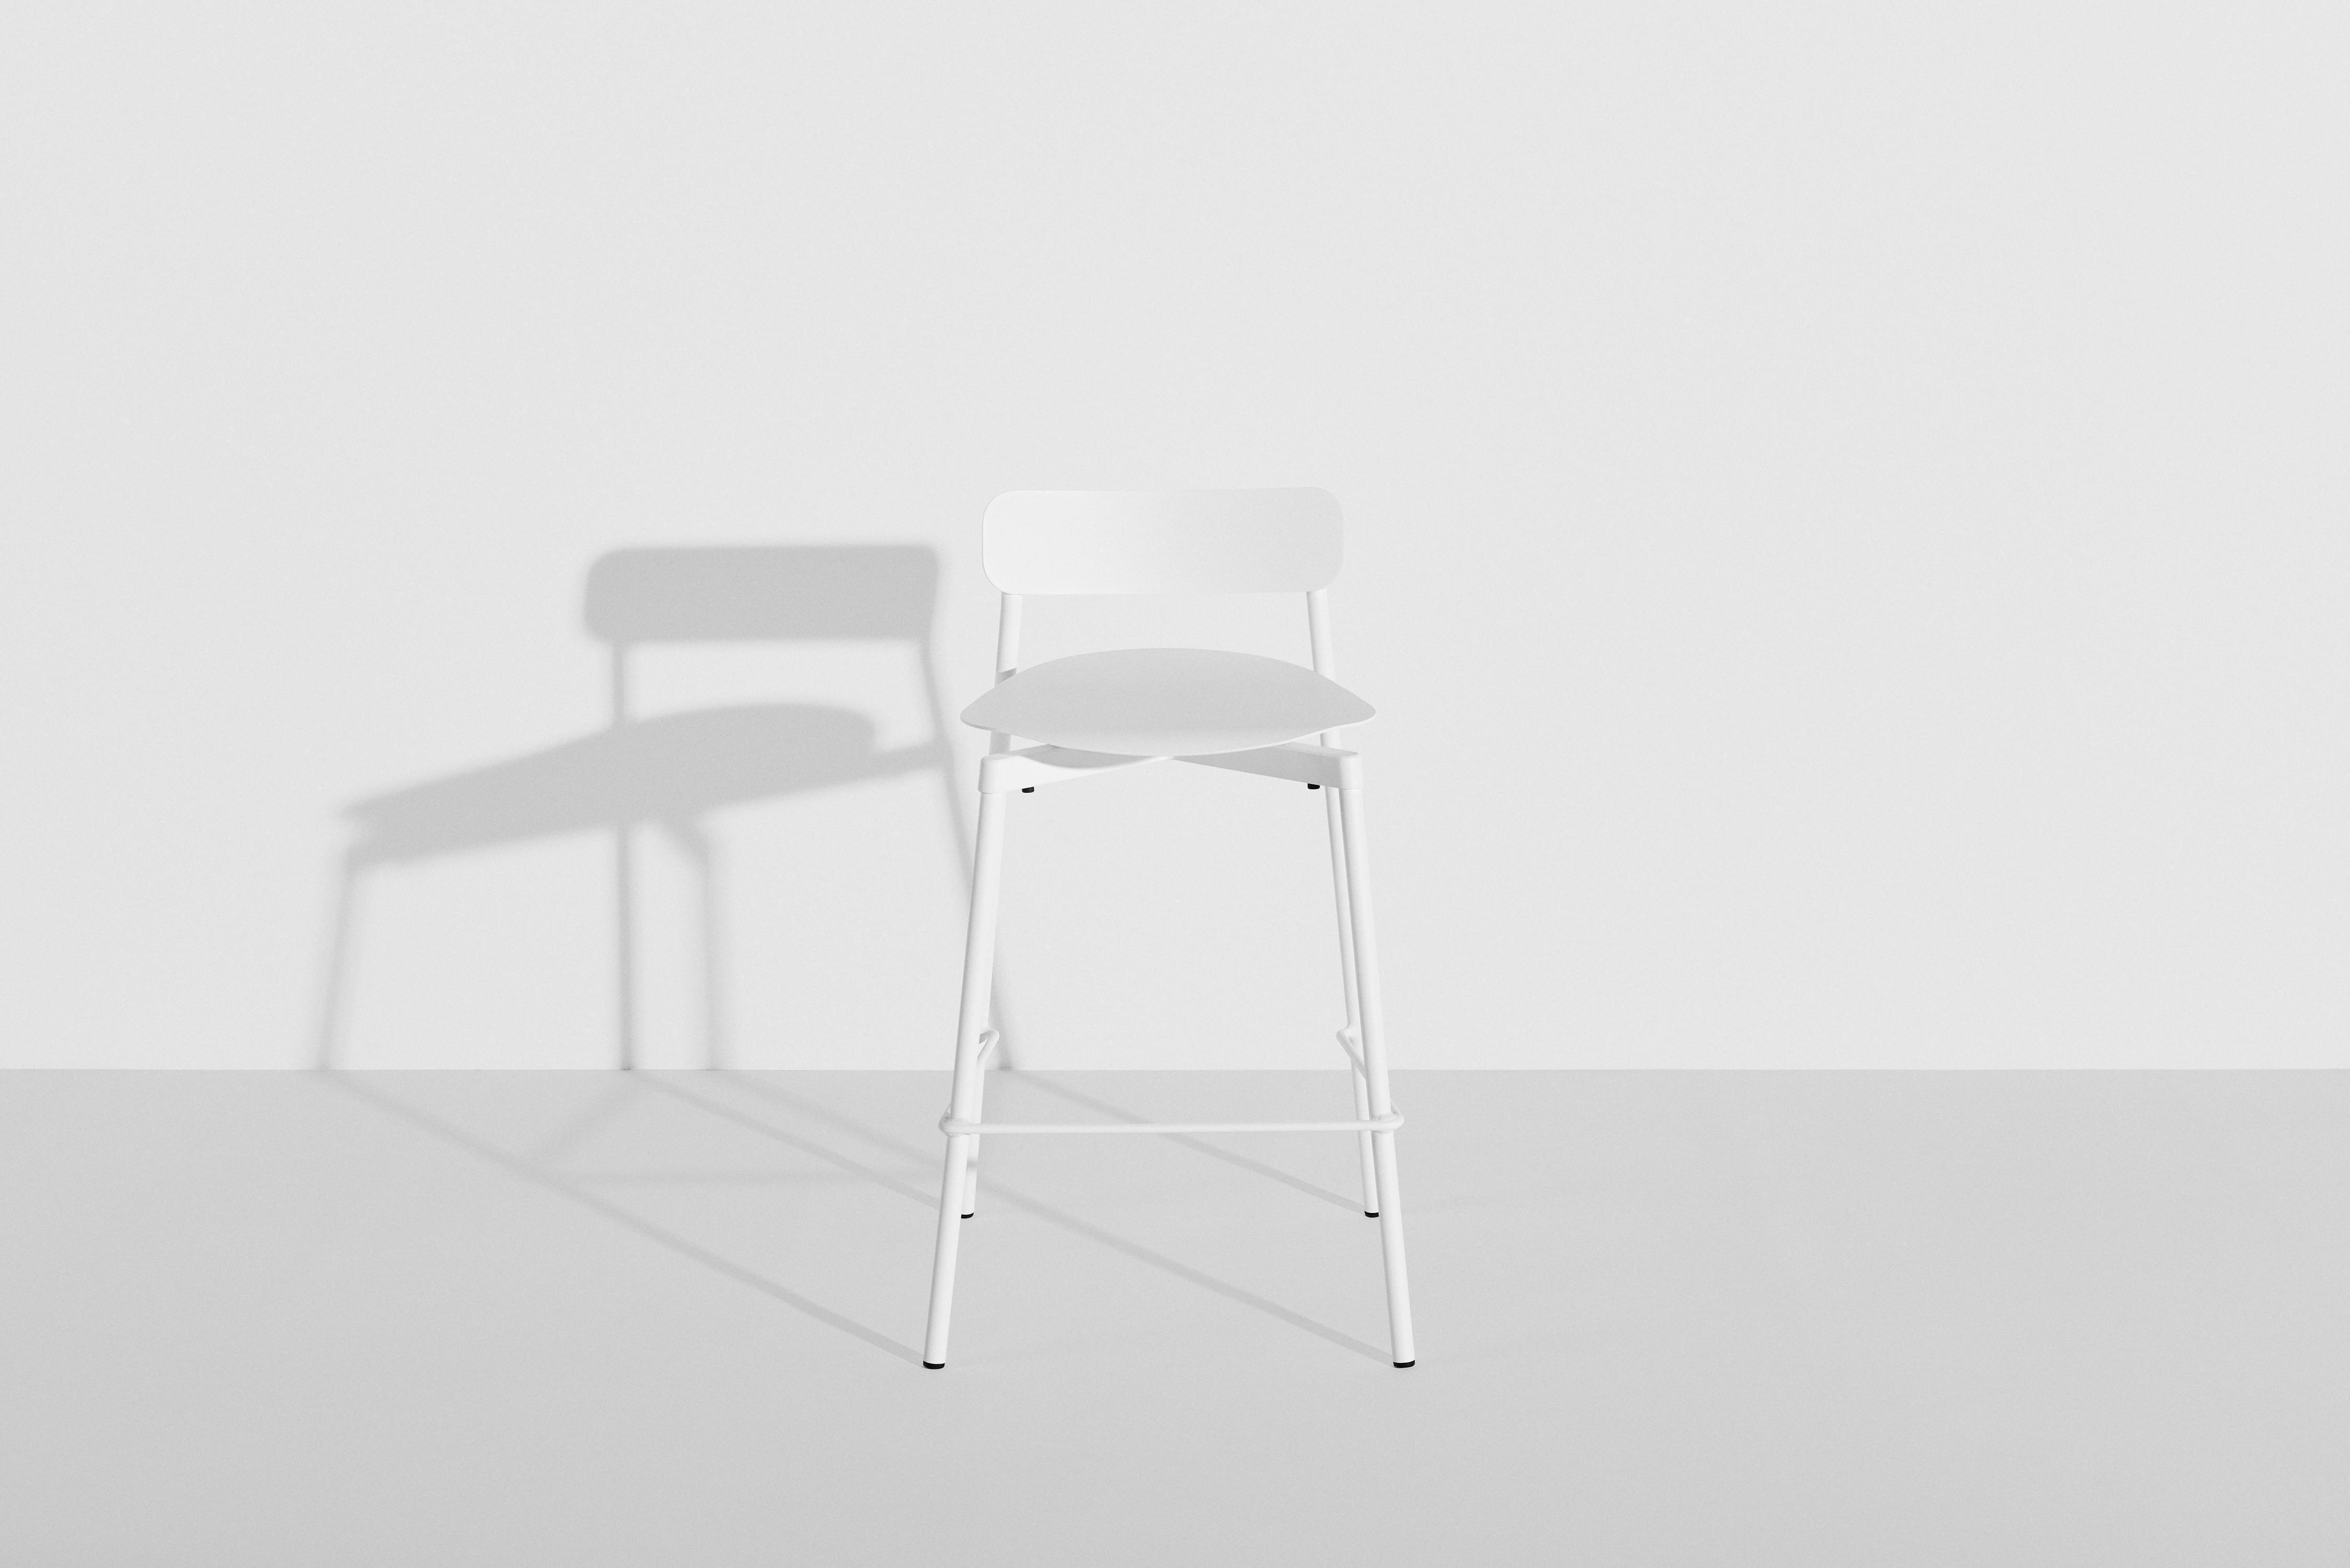 Petite Friture Small Fromme Bar stool in White Aluminium by Tom Chung, 2020

The Fromme collection stands out by its pure line and compact design. Absorbers placed under the seating gives a soft and very comfortable flexibility to seats. Made from